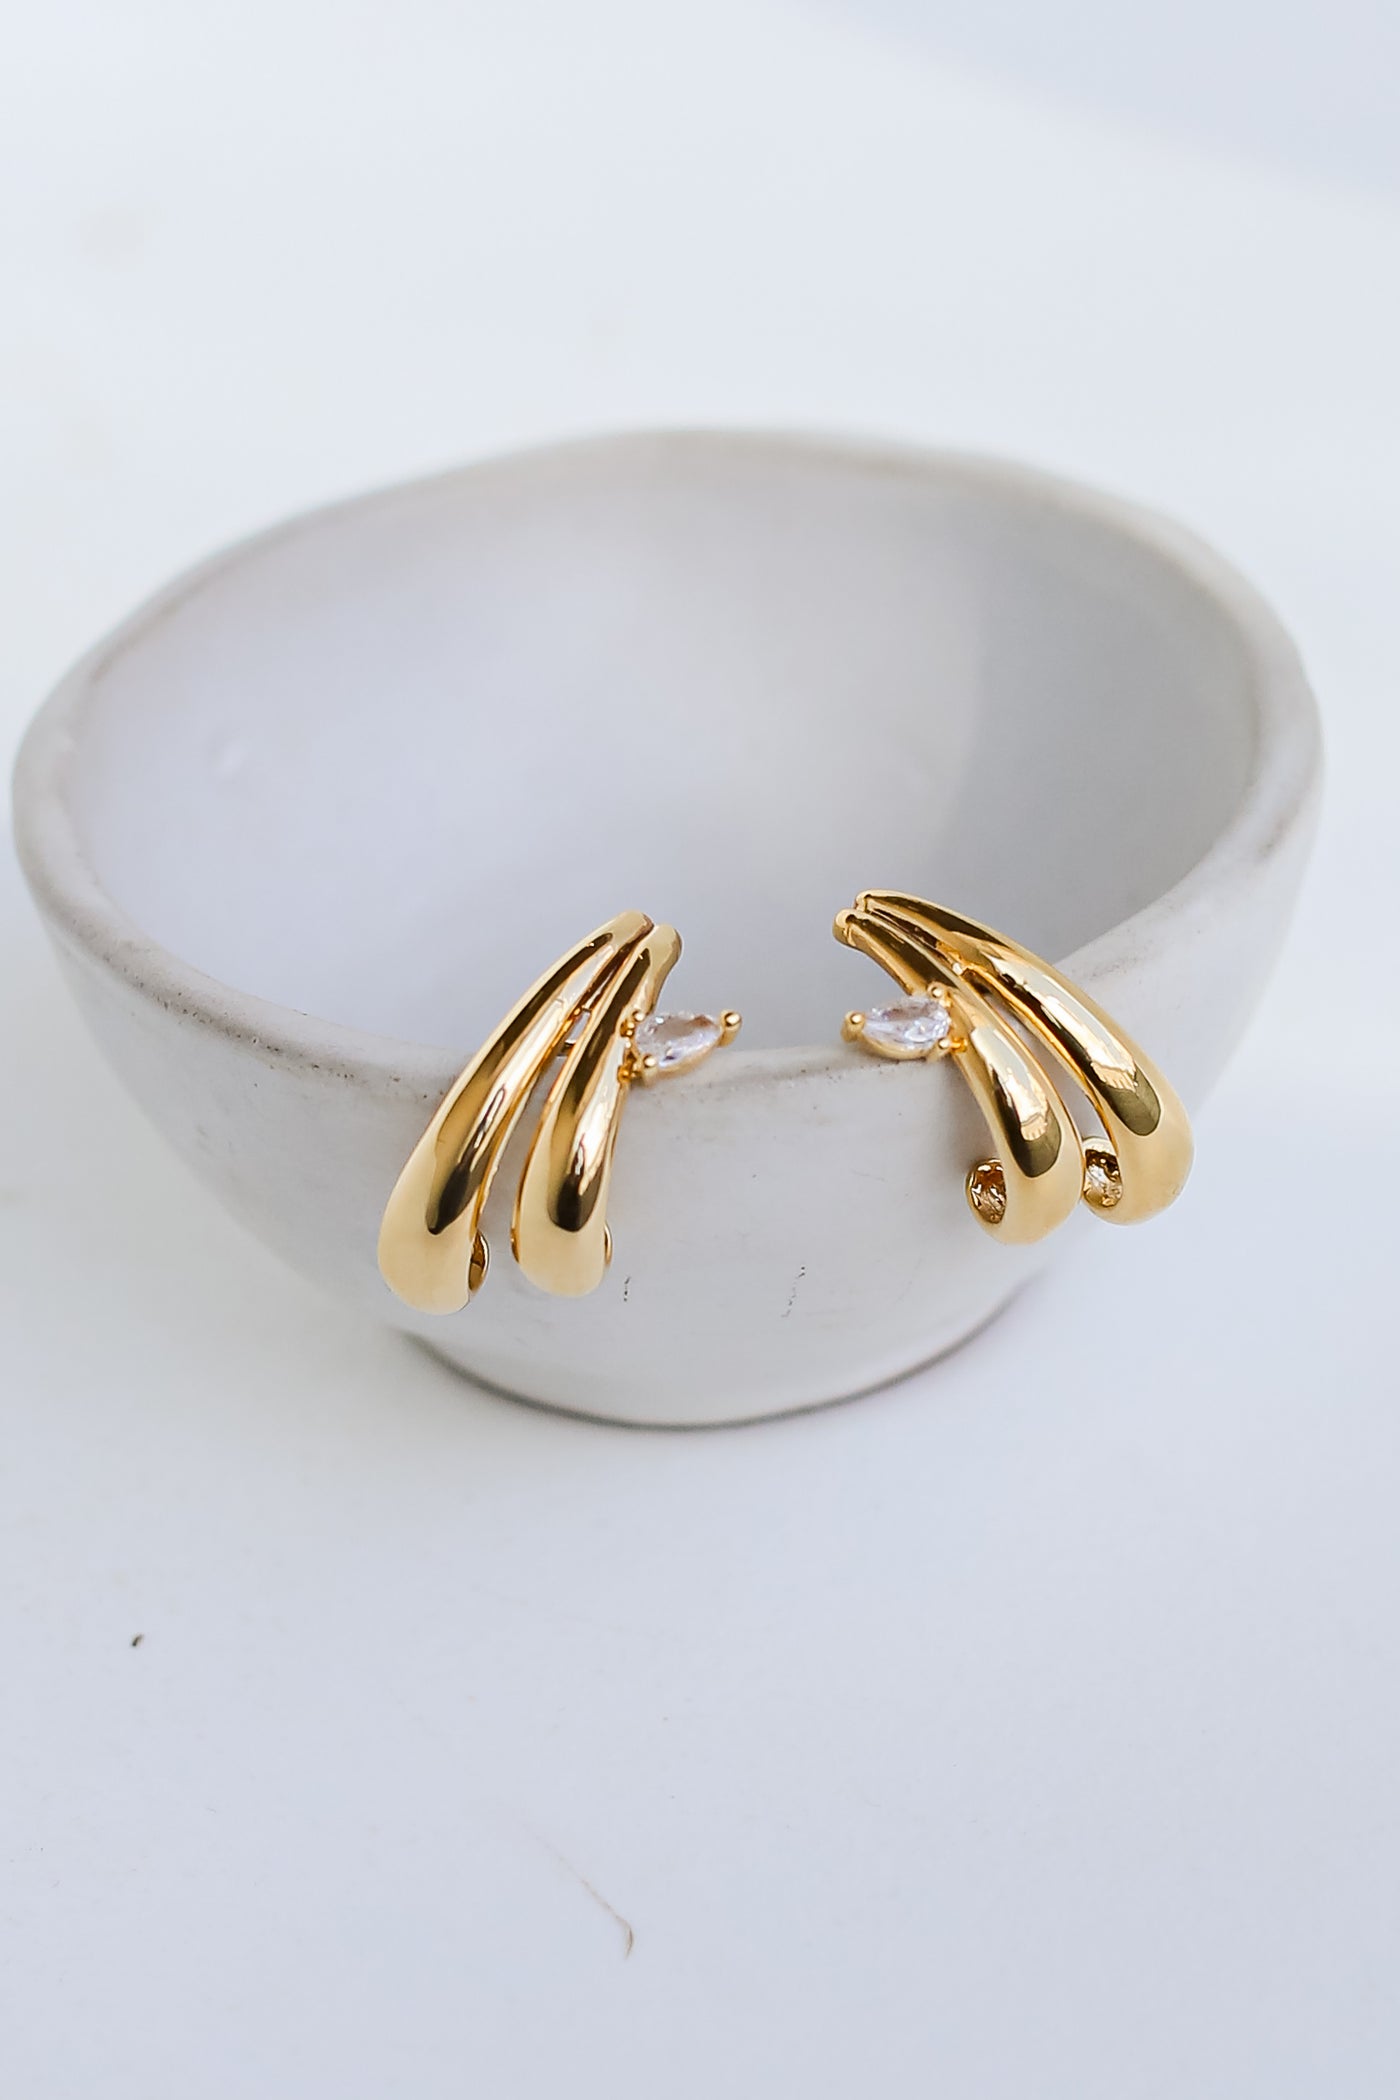 Gold Statement Earrings flat lay